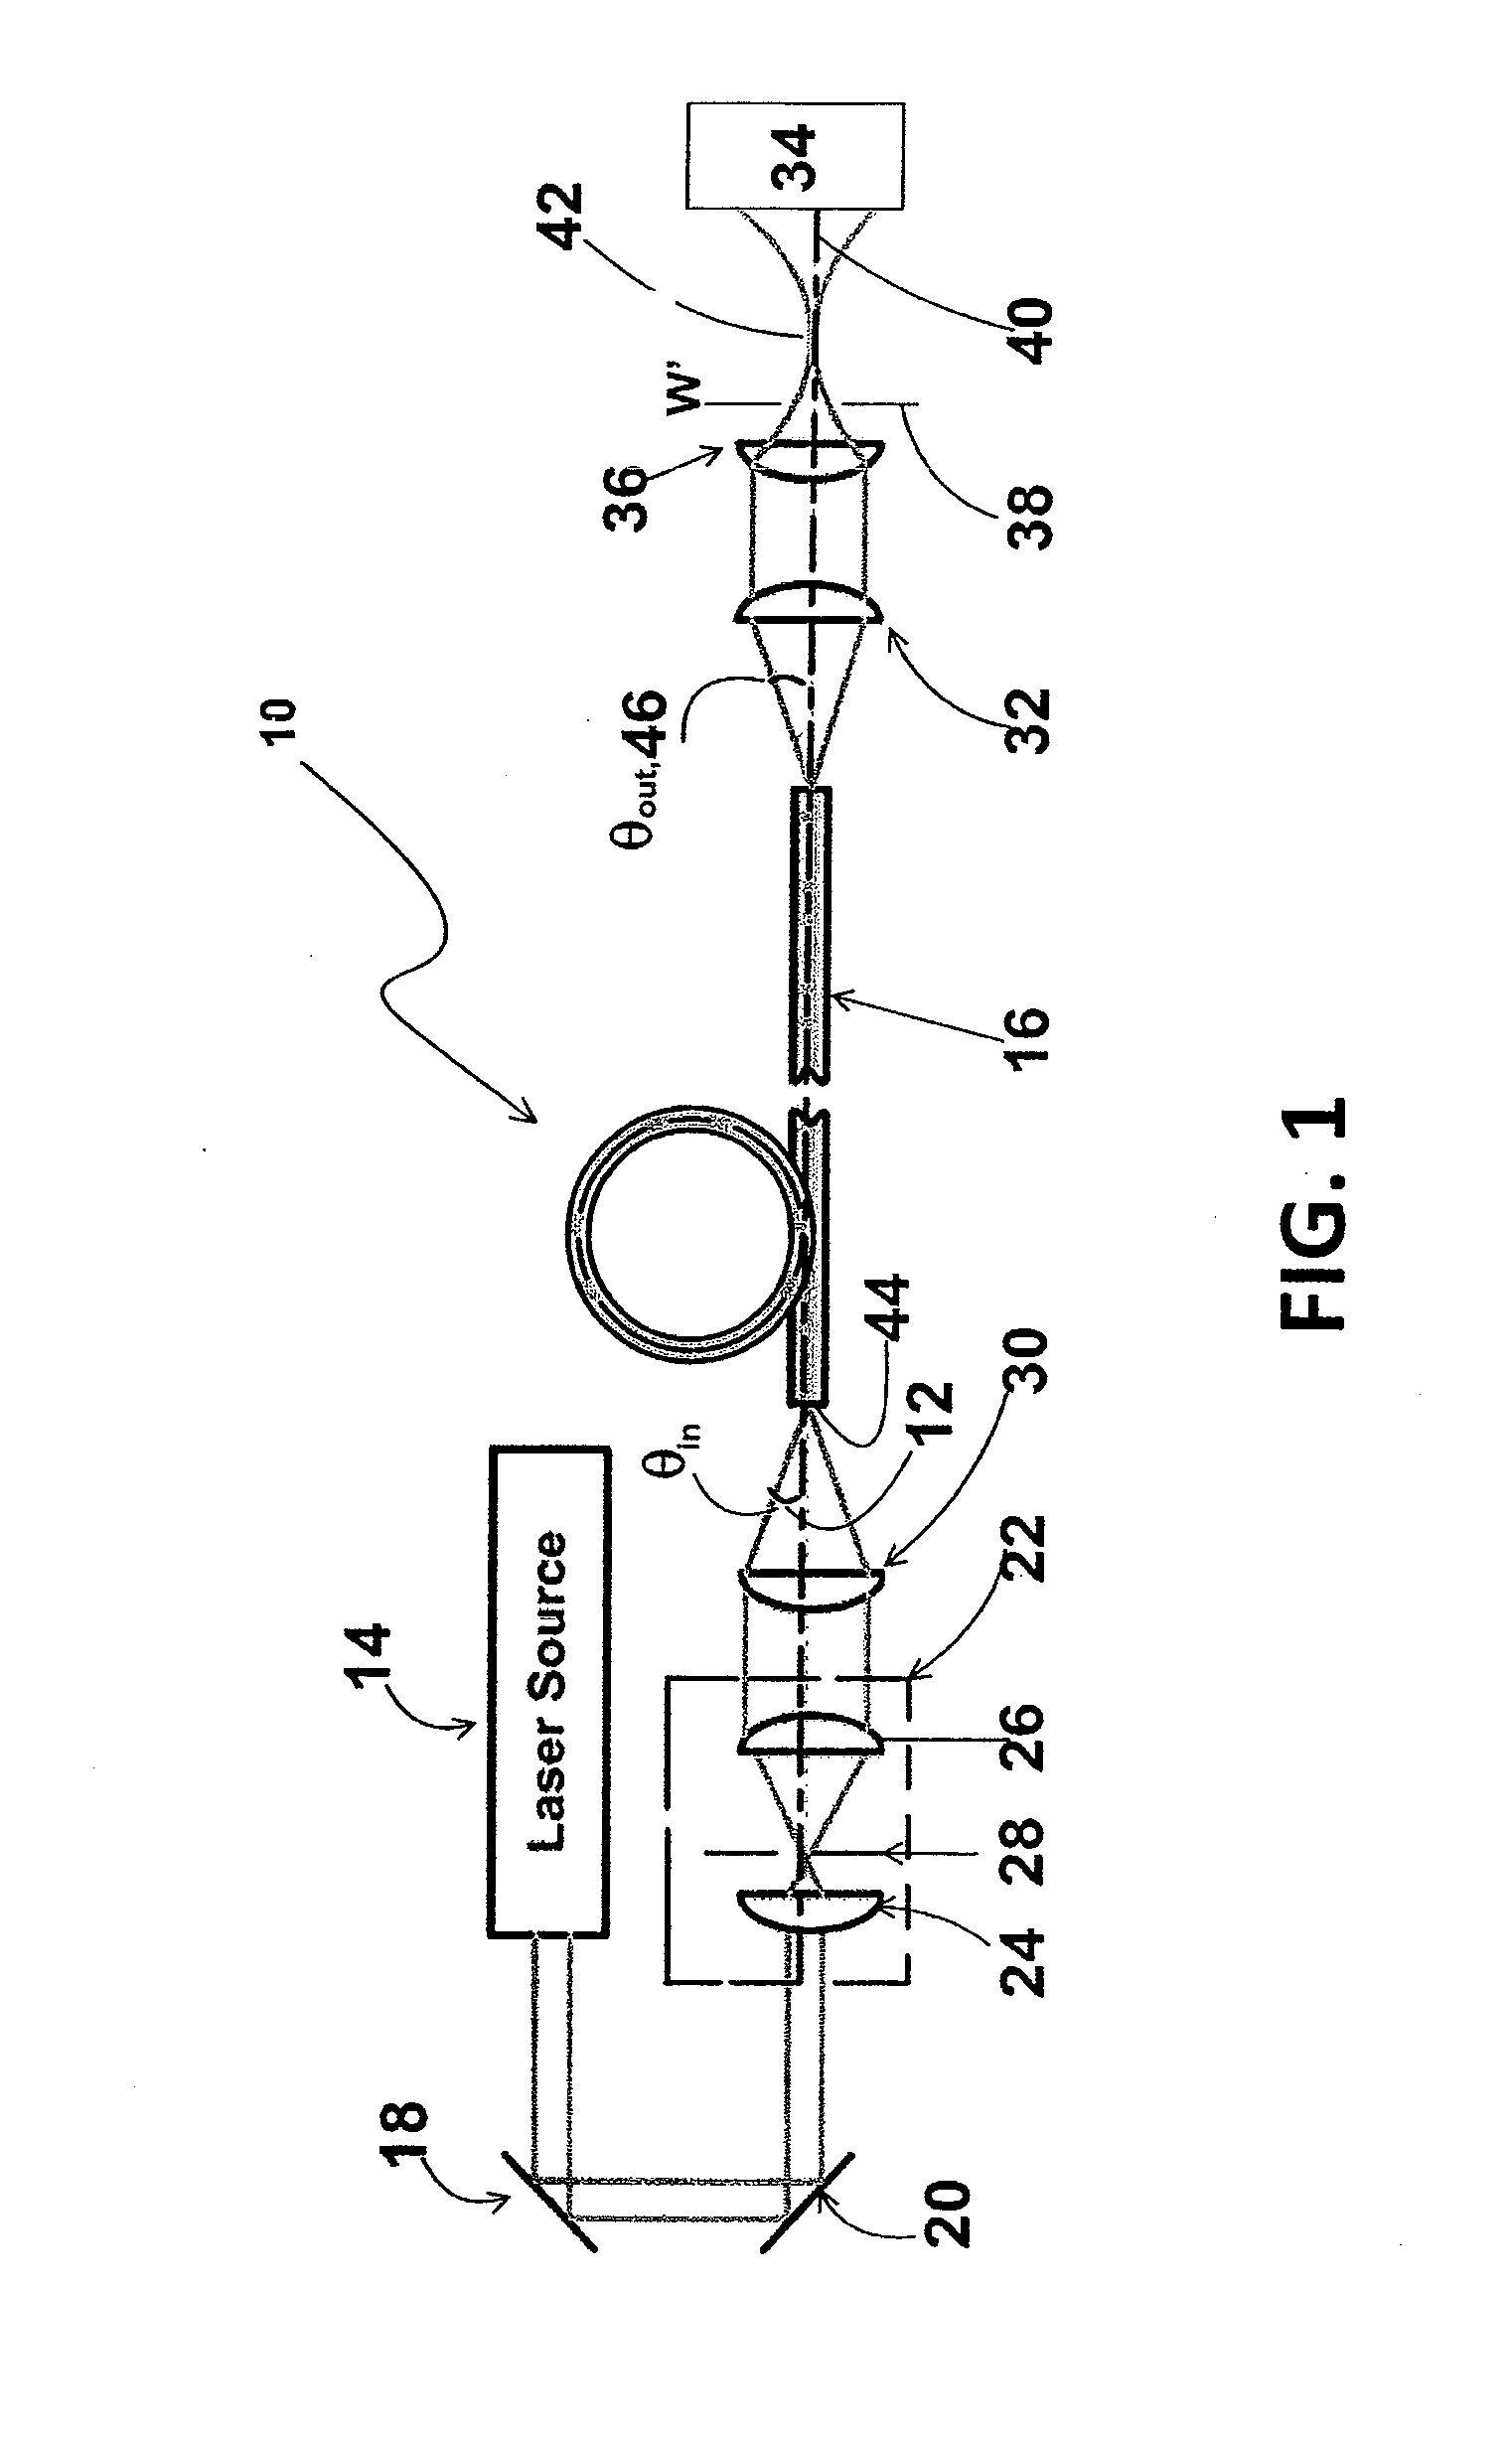 Transmission of laser pulses with high output beam quality using step-index fibers having large cladding